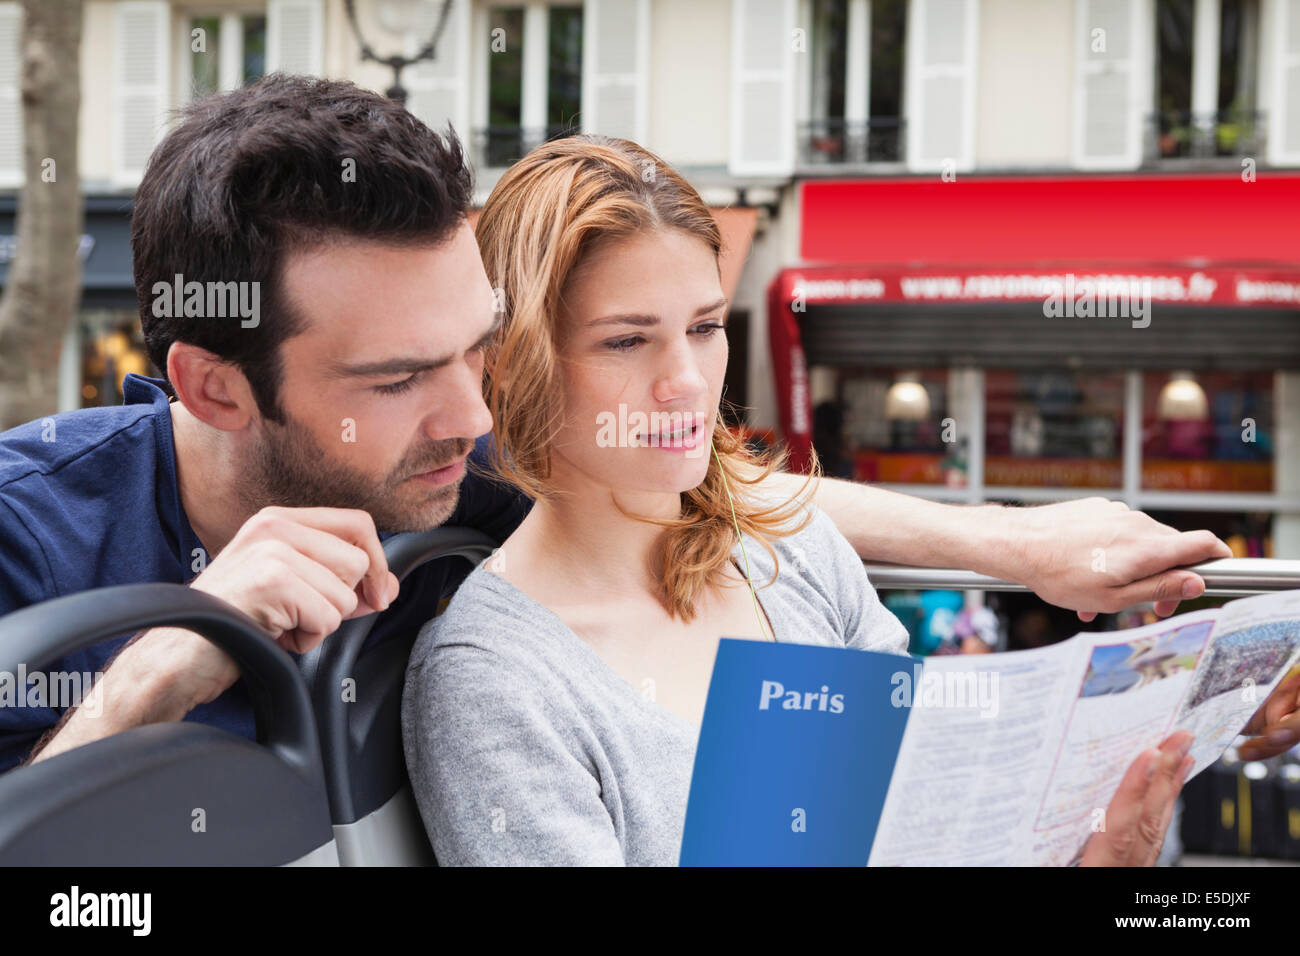 France, Paris, couple looking at a city map Stock Photo